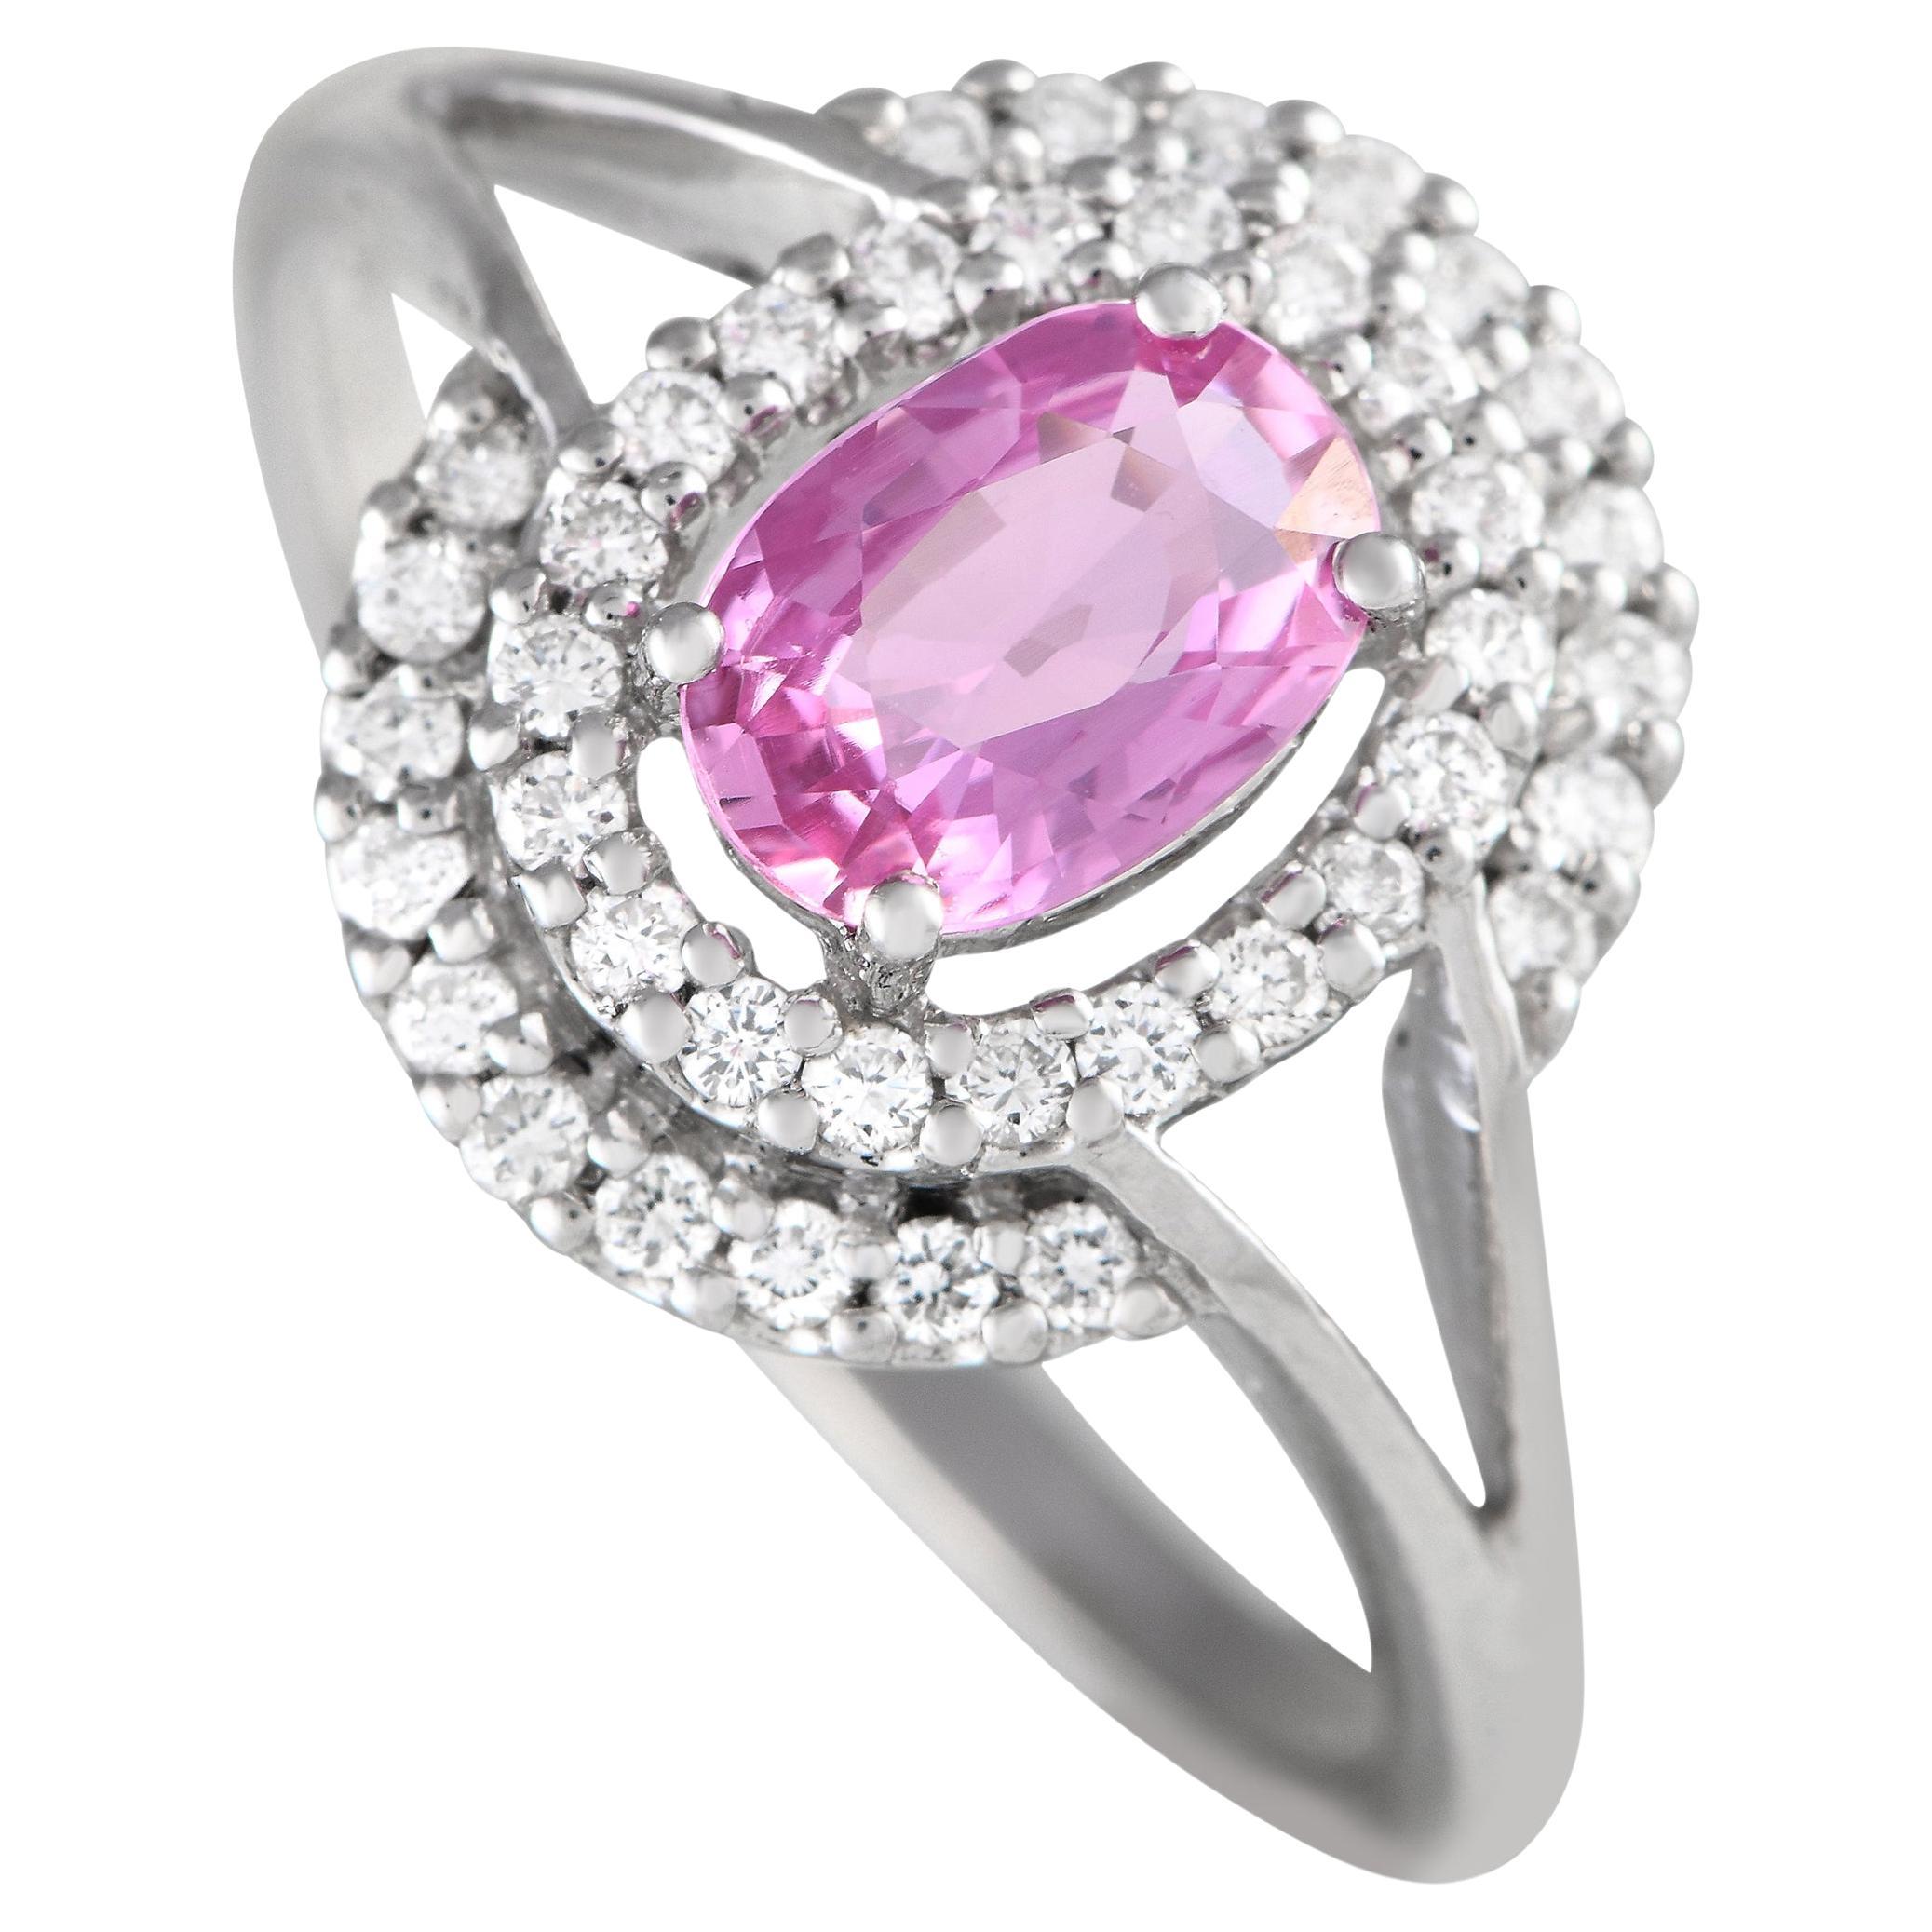 18K White Gold 0.40ct Diamond and Pink Sapphire Ring